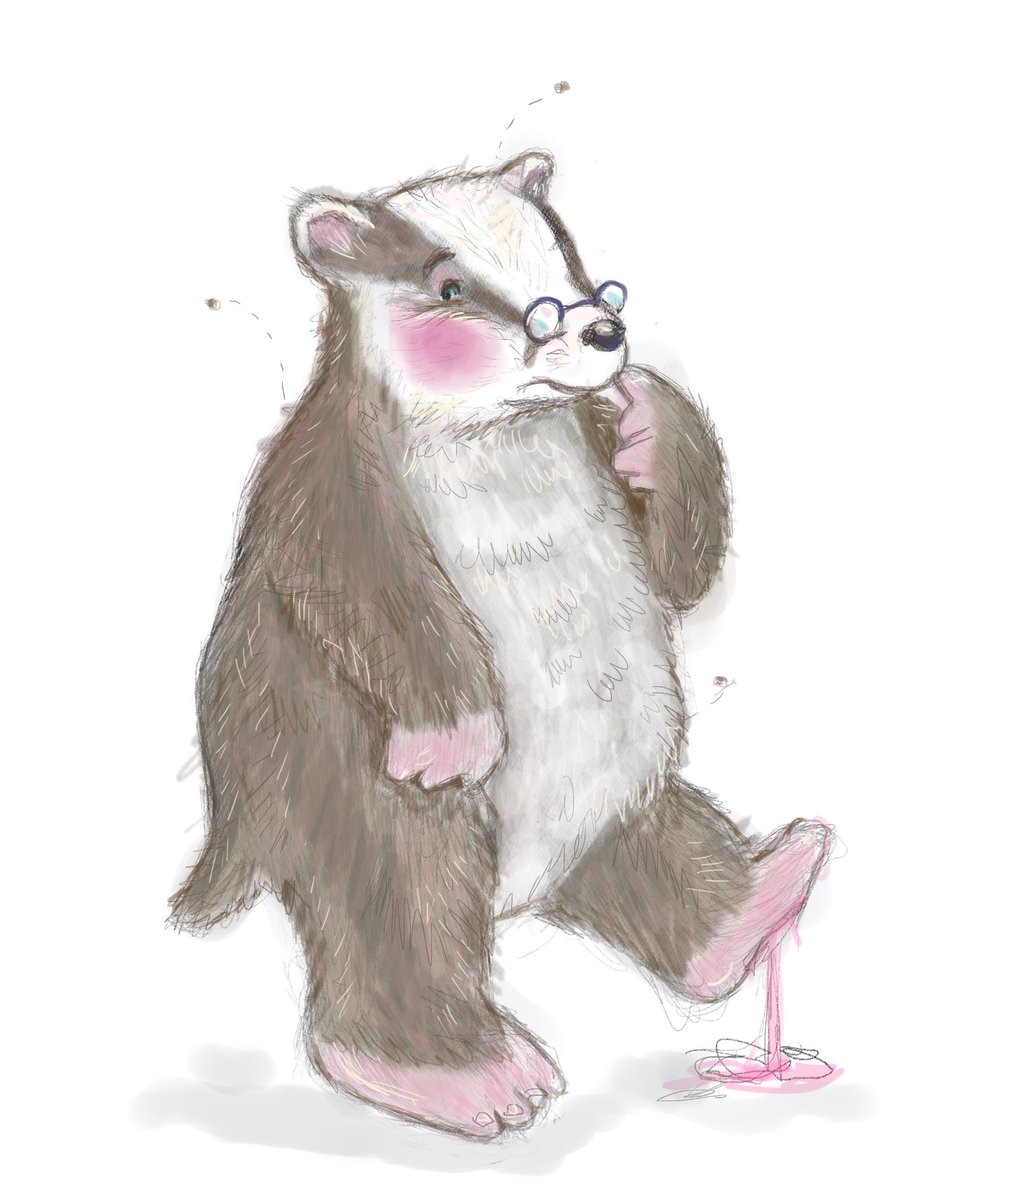 Bumble the Badger, another hand drawn character for a book to screen pitch.